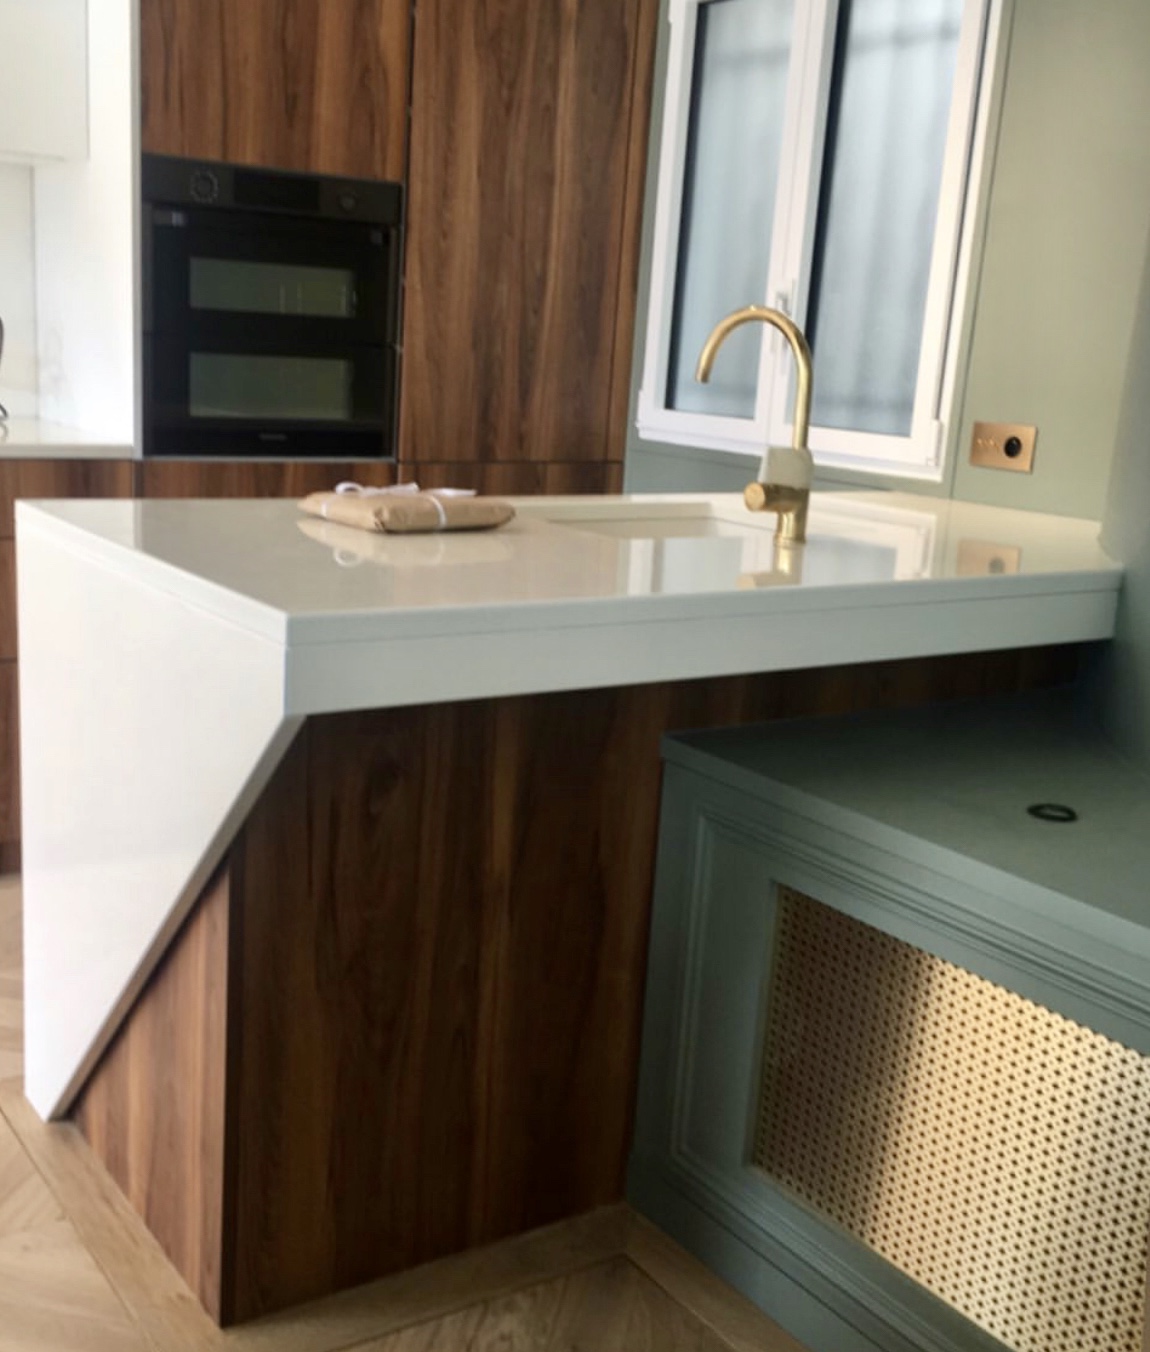 Enamelled lava stone kitchen worktop central island and washbasin in a parisian flat